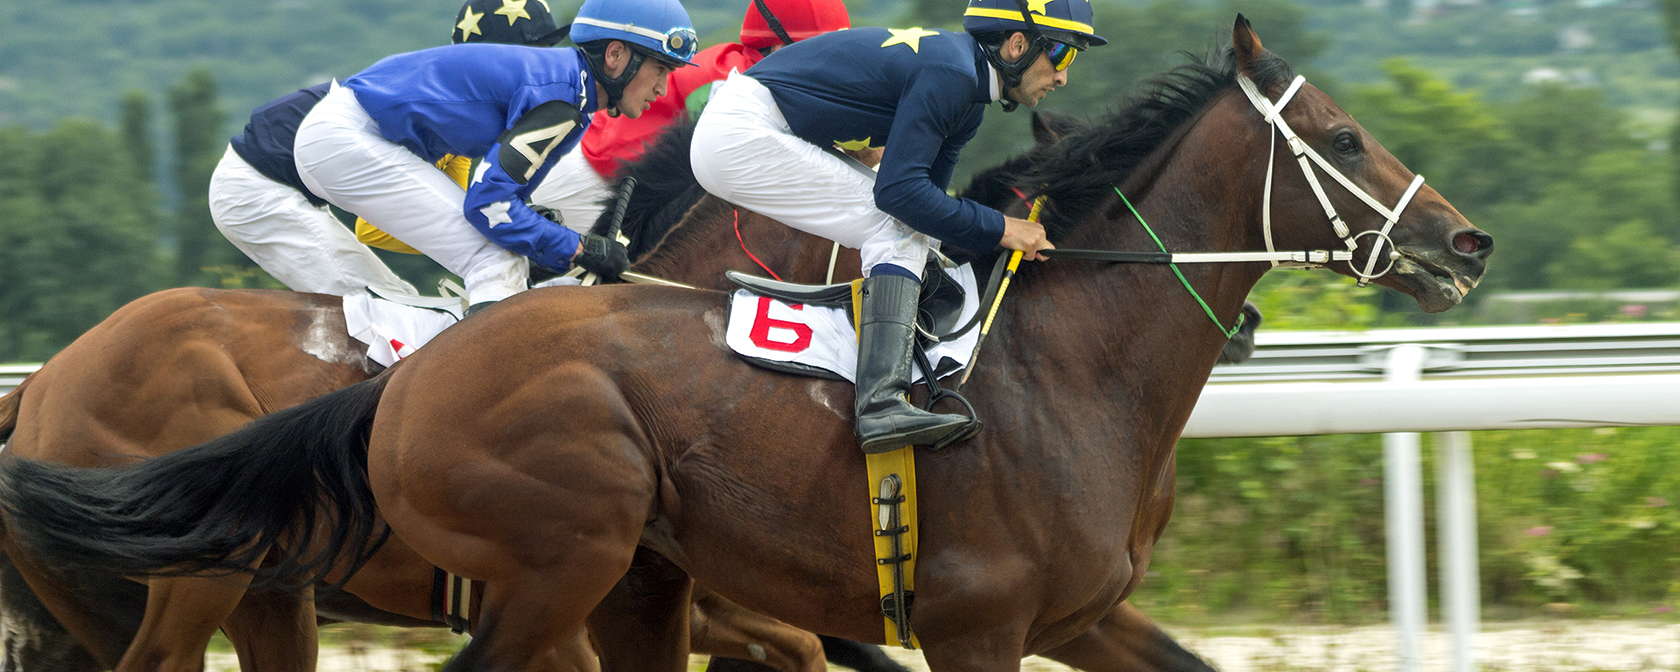 In a win for animals, U.S. Supreme Court leaves Horseracing Integrity and Safety Act intact